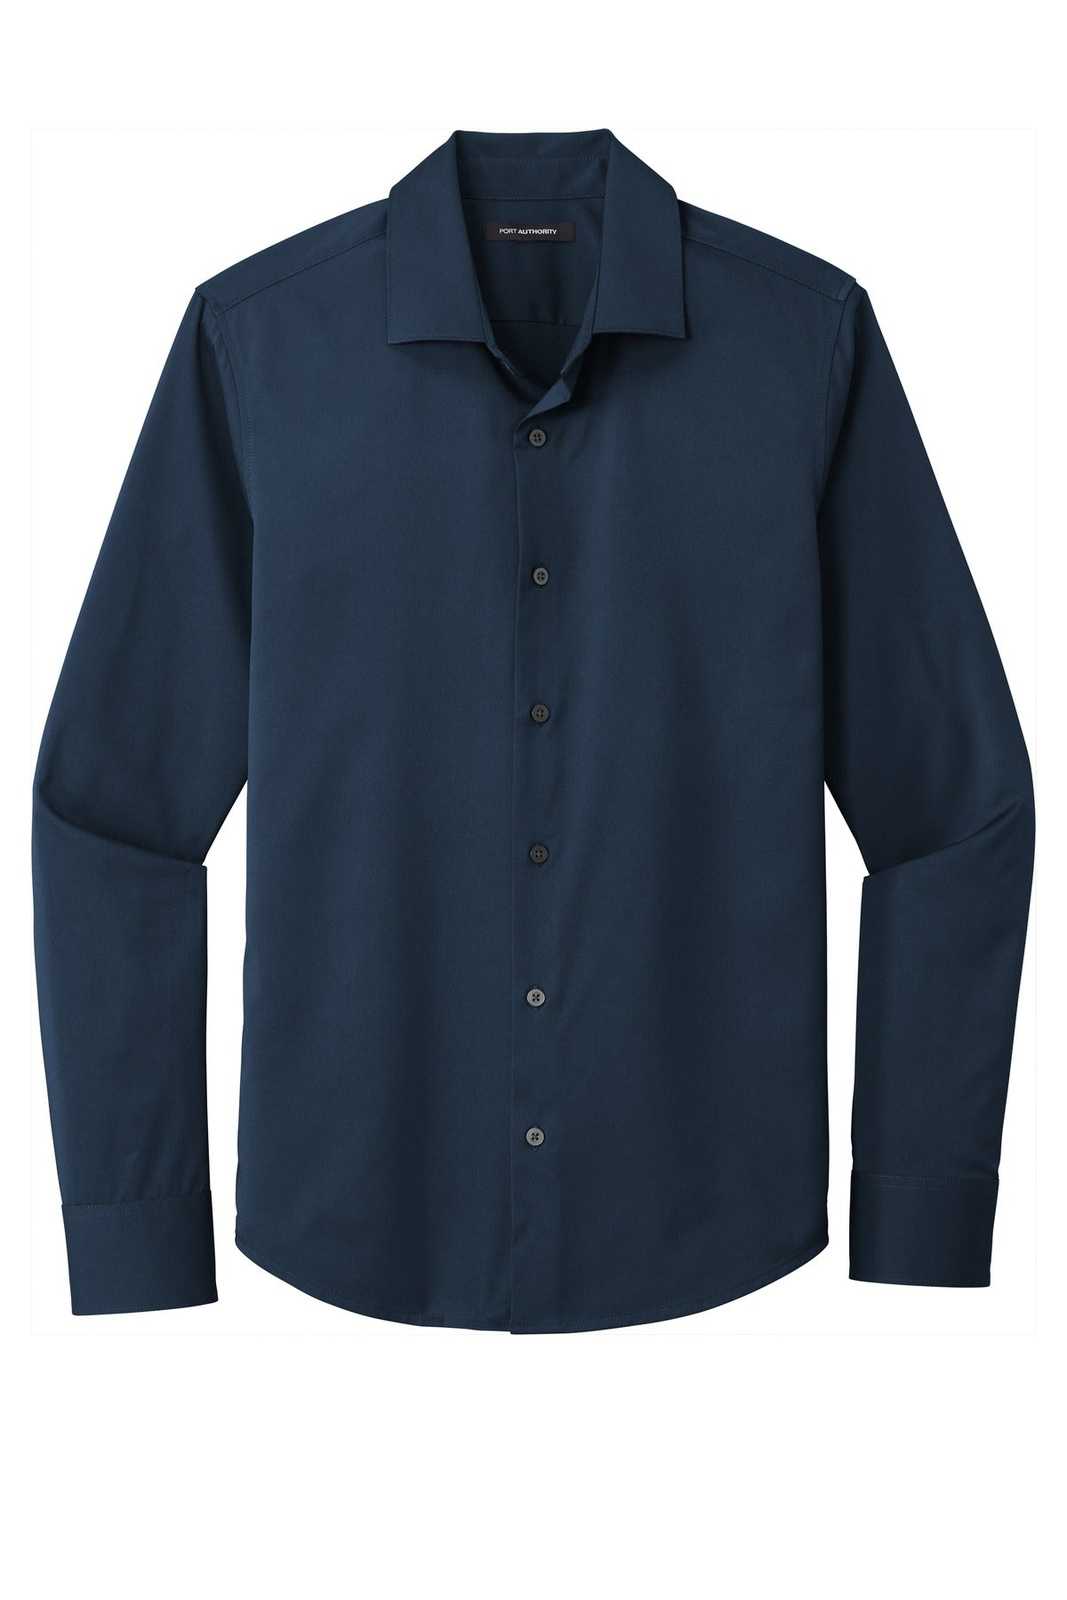 Port Authority W680 City Stretch Shirt - River Blue Navy - HIT a Double - 5